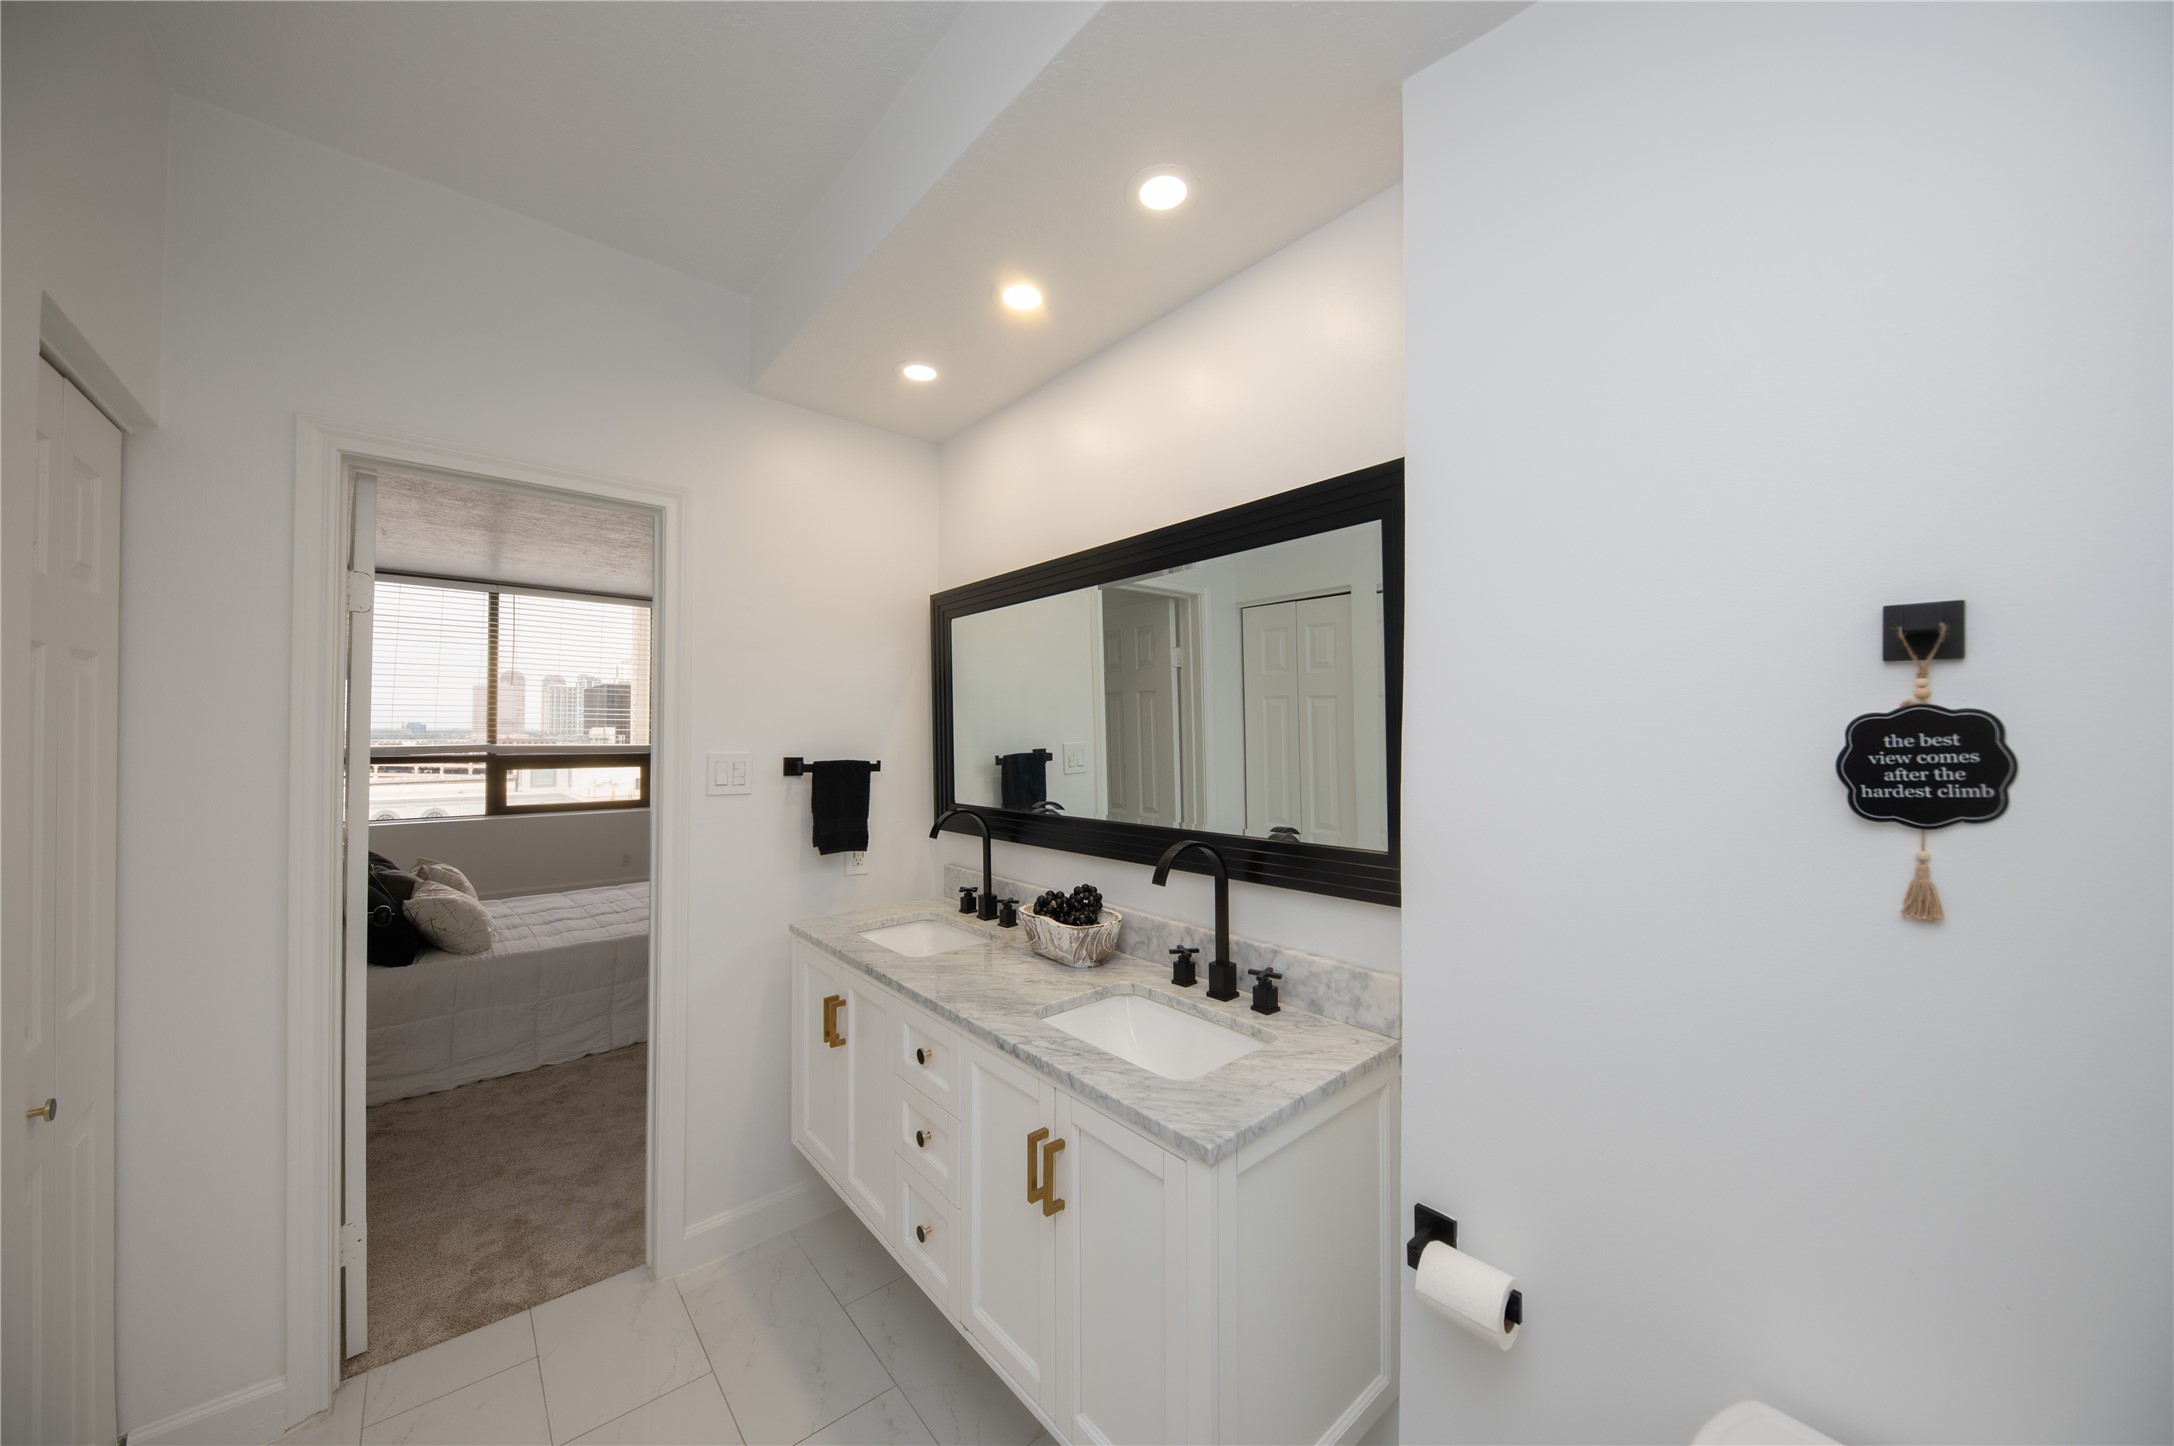 Here is another angle on the beautiful primary bathroom with marble countertops. This well thought out bathroom is sure to delight the discerning buyer looking to make a move into the Galleria area.